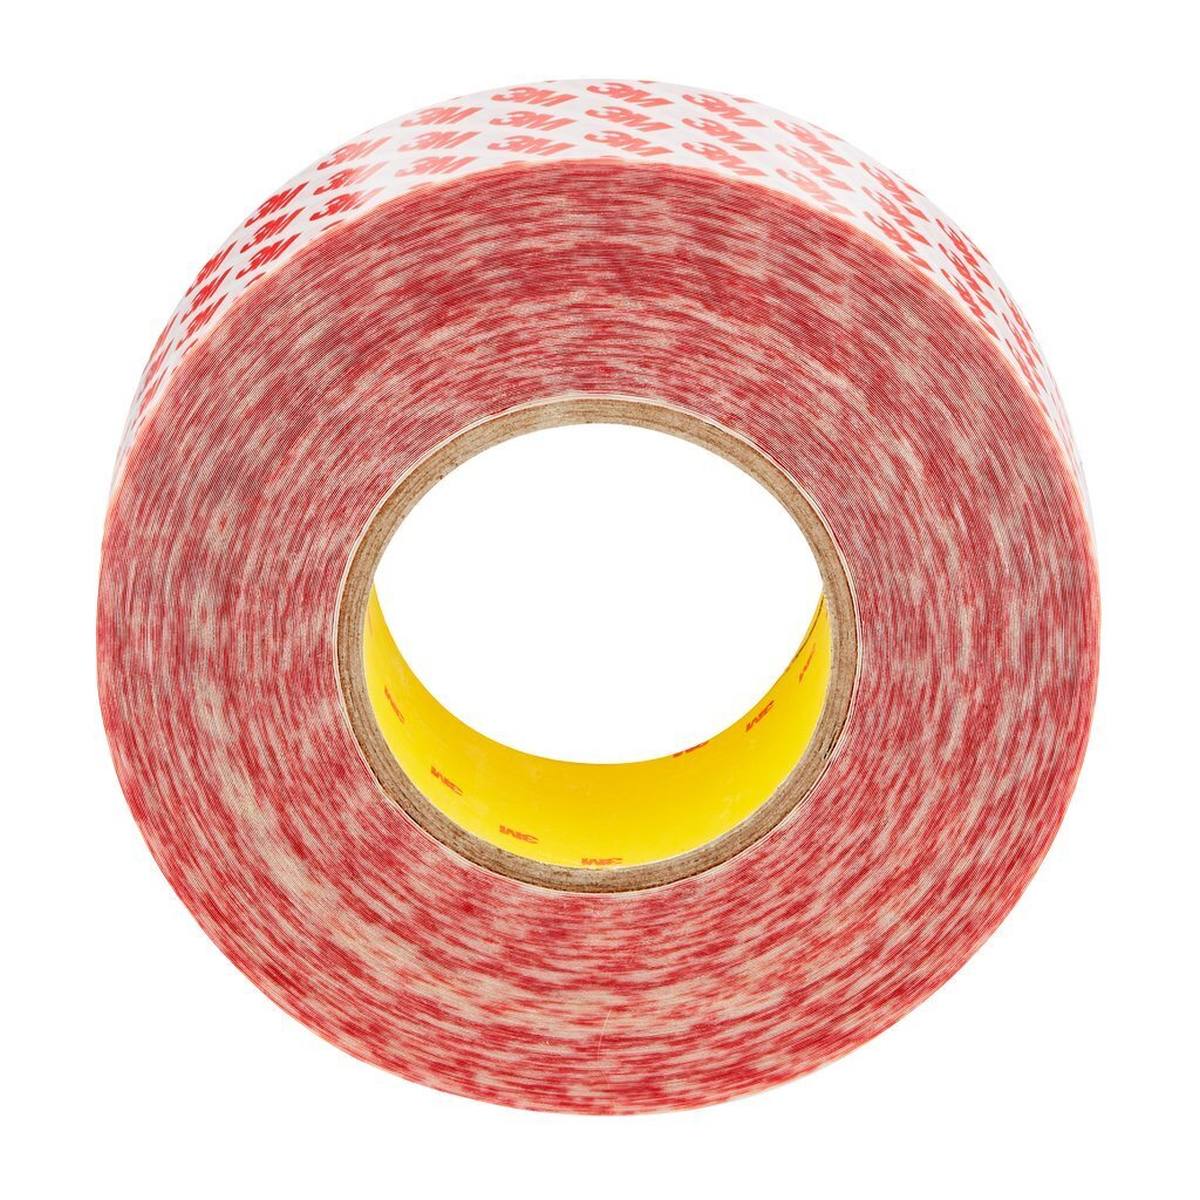 3M Double-sided adhesive tape with polyester backing GPT-020F, transparent, 50 mm x 50 m, 0.202 mm